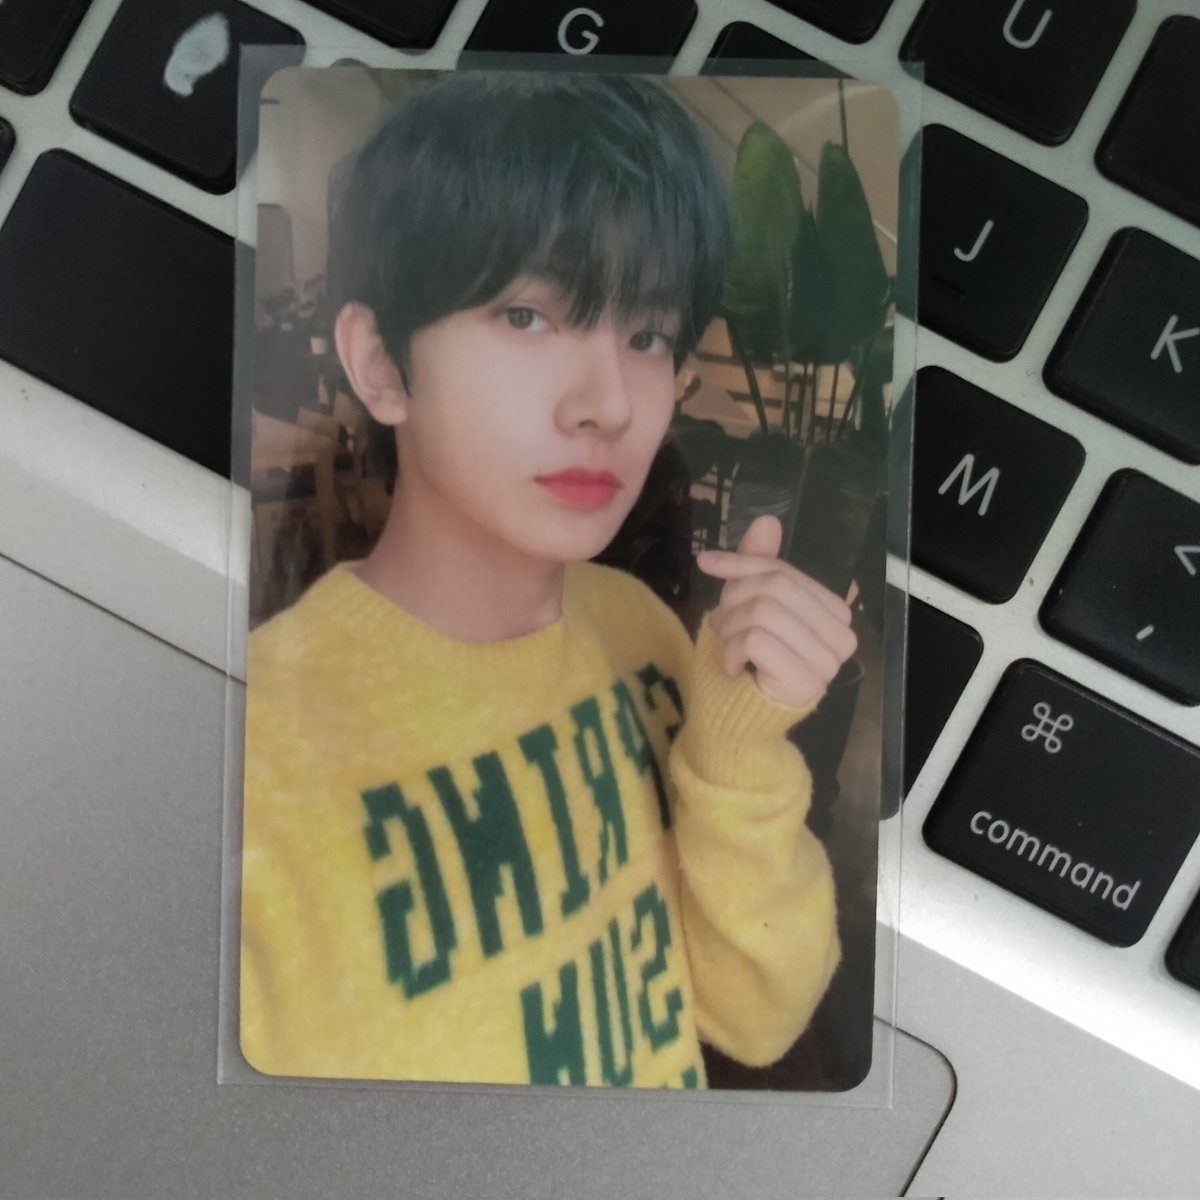 wts lfb enhypen ph HEESEUNG SG22 NRPC › ₱100 › onhand › payo/2 days reservation › mint condition › mop: gcash › mod: sco, direct ggx, j&t, flash express reply or dm to avail !